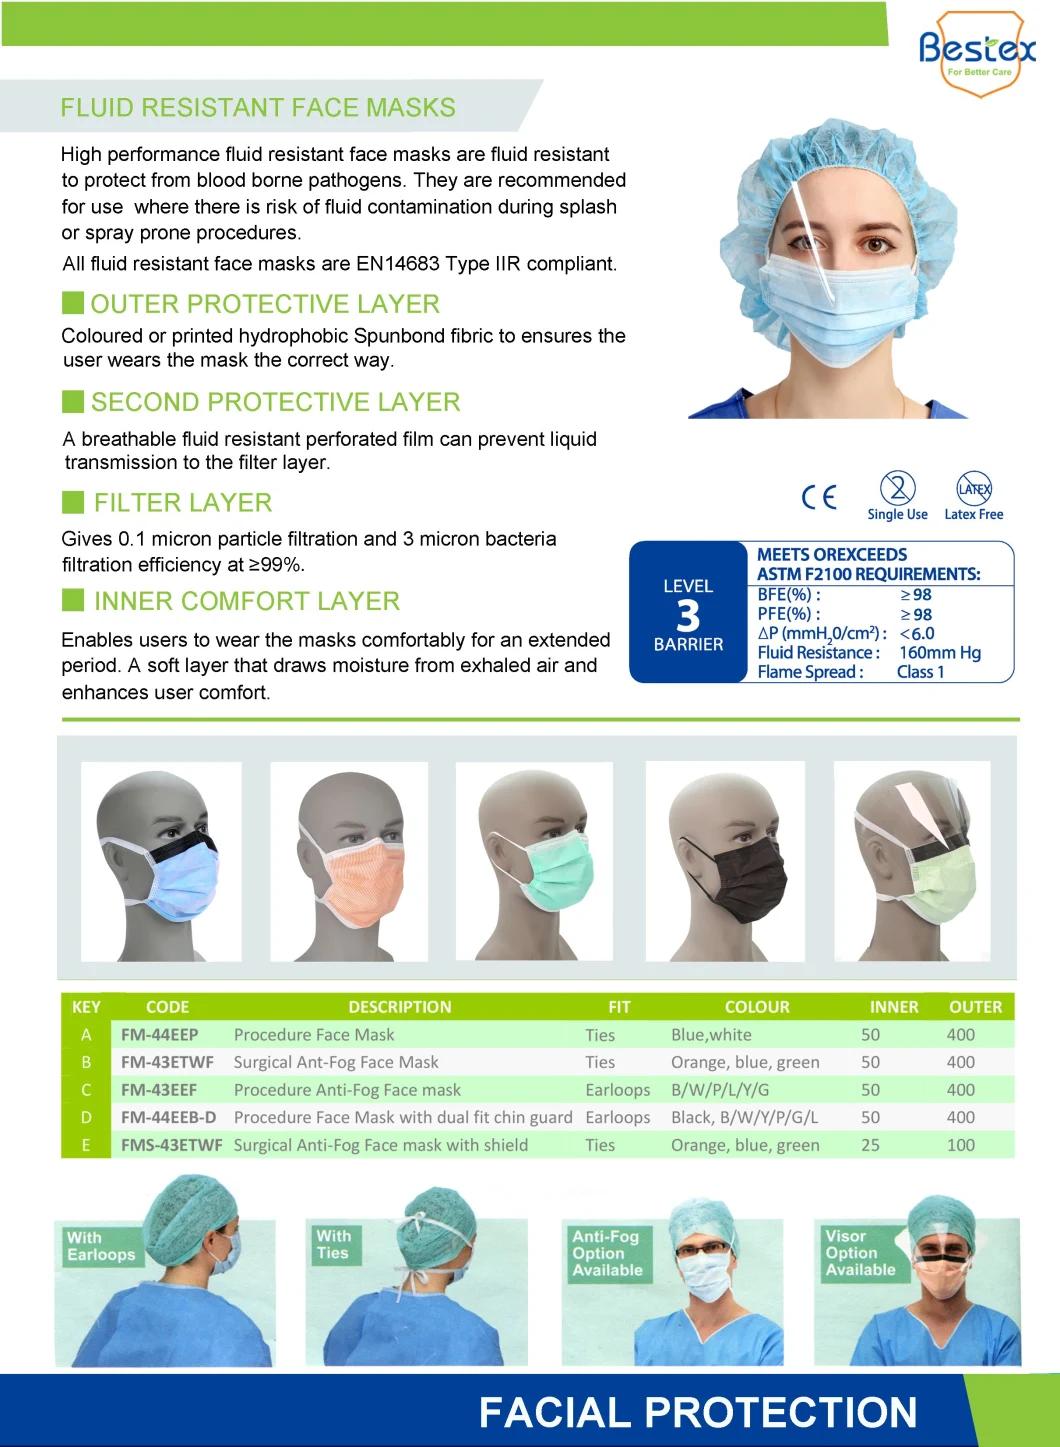 Best Price Surgical Protect with Shield Mask with Visor Against Splash